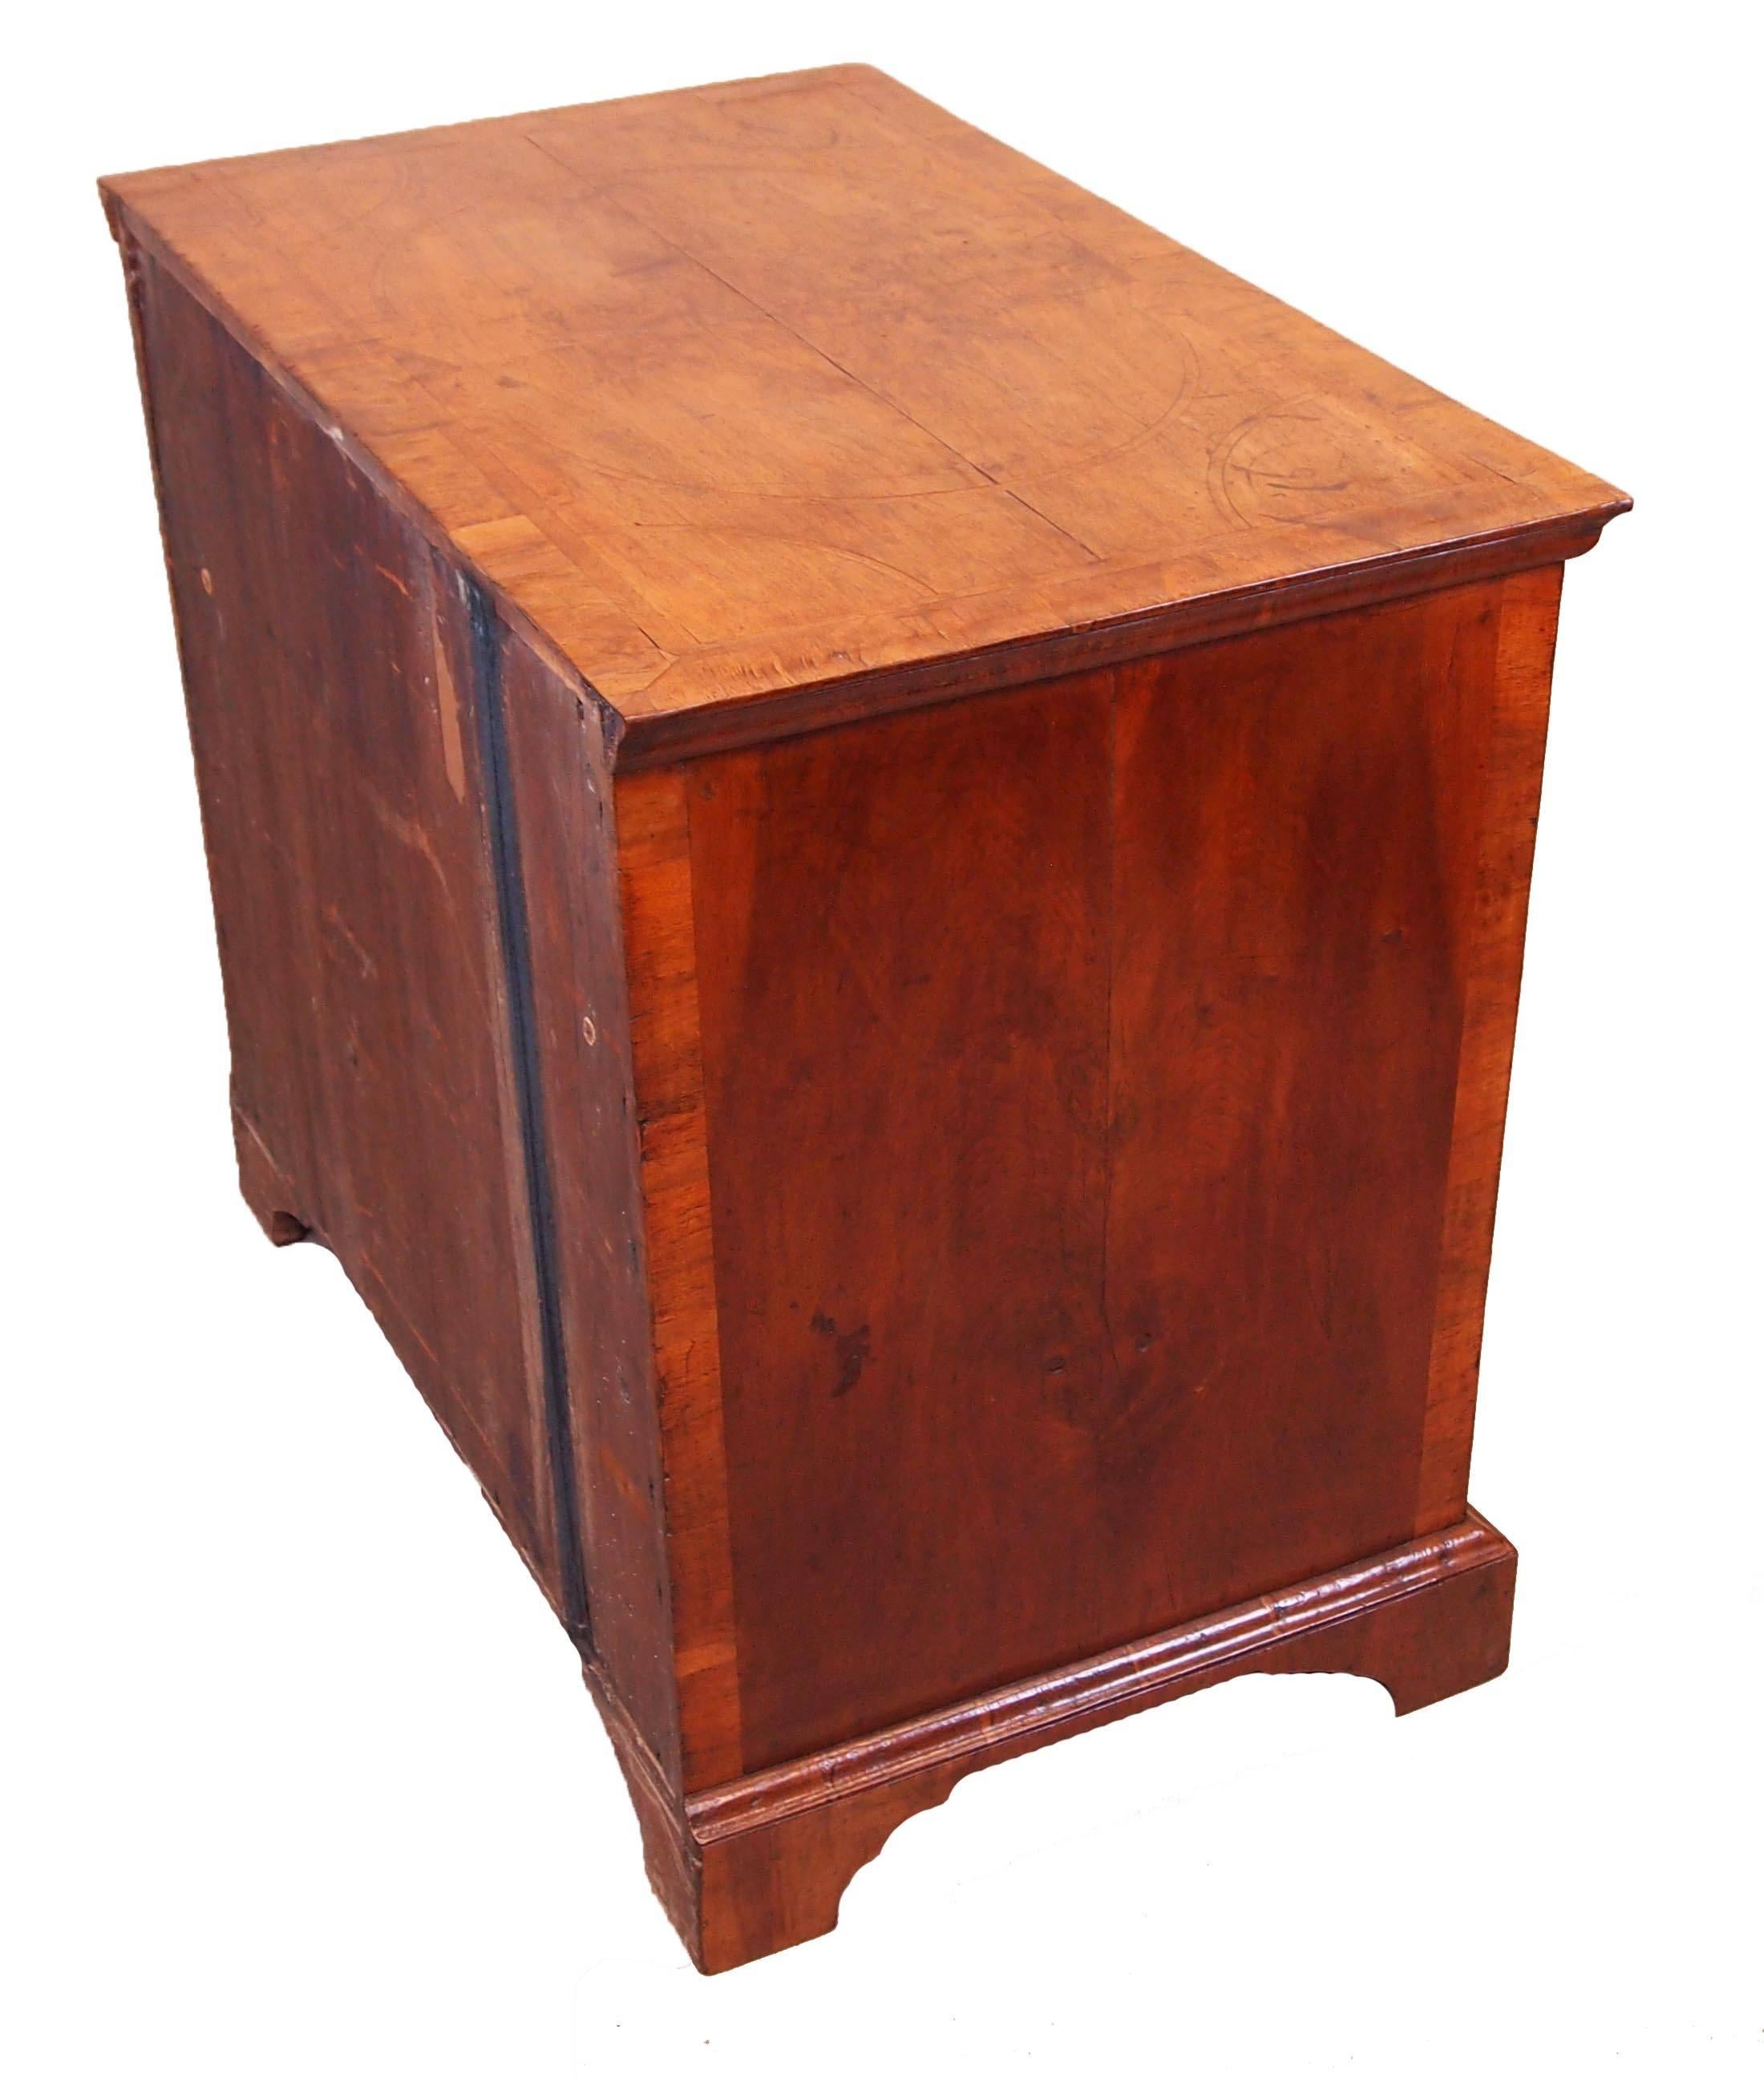 A George I period walnut chest having well figured quarter veneered top
With geometric inlaid and banded decoration above two short and three
Long drawers with replacement brasswear raised on later bracket feet.